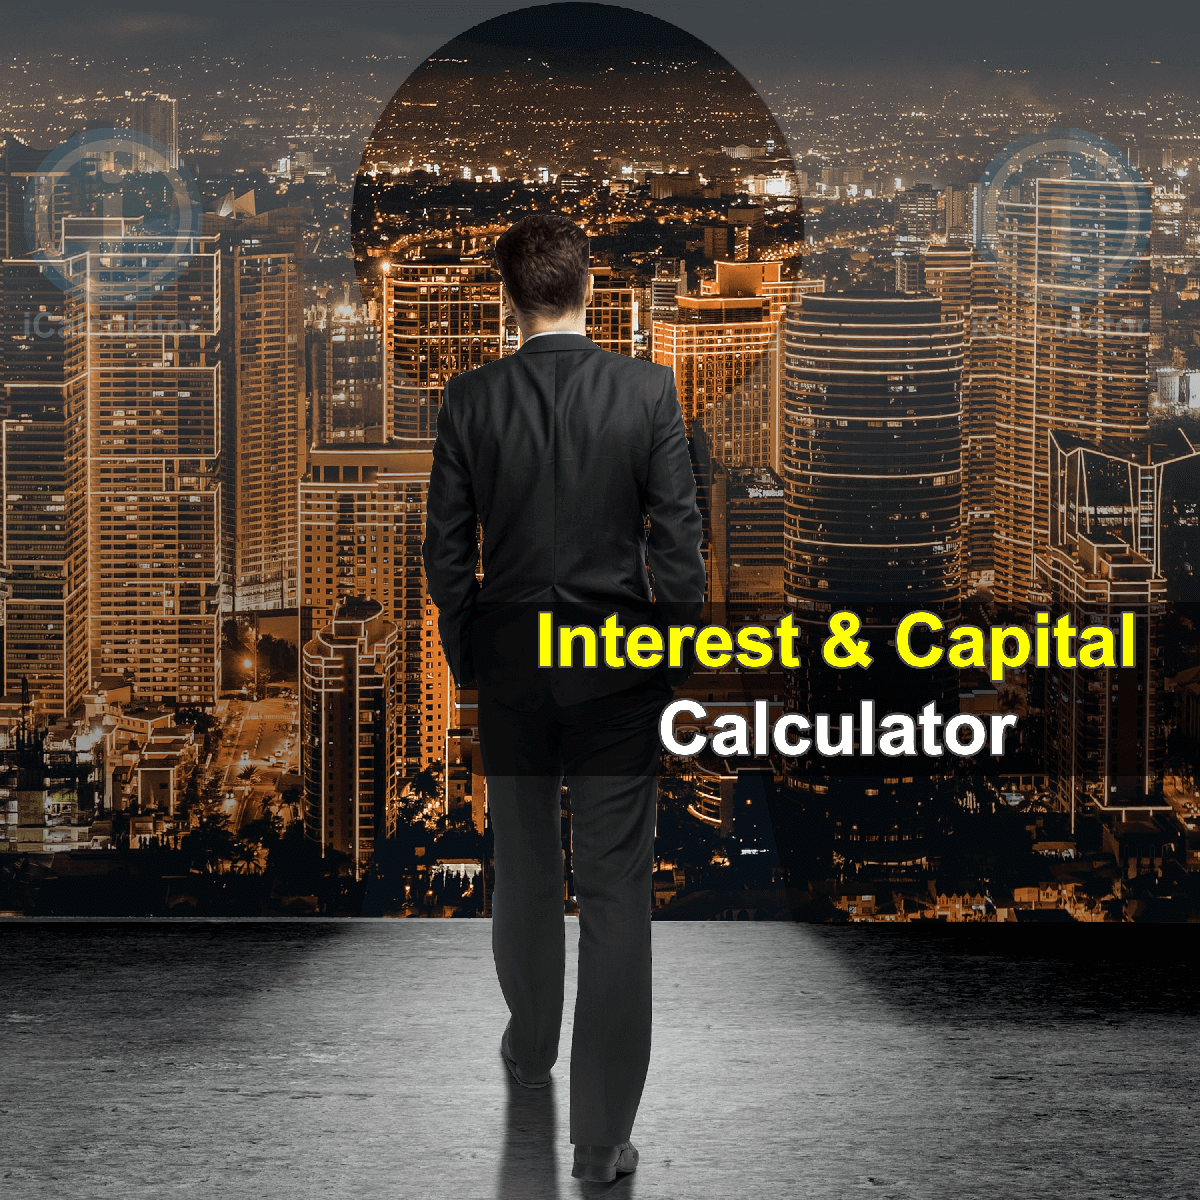 Interest plus Principal Calculator. This image provides details of how to calculate the Interest plus Principal using a calculator and notepad. By using the Interest plus Principal formula, the Interest plus Principal Calculator provides a true calculation of the benefits that a financial institution or an investor receives, such as fee, which is paid for the processing or a loan or a third party commission, dividends or profits earned on shareholdings as they are considered the reward for risk taking.